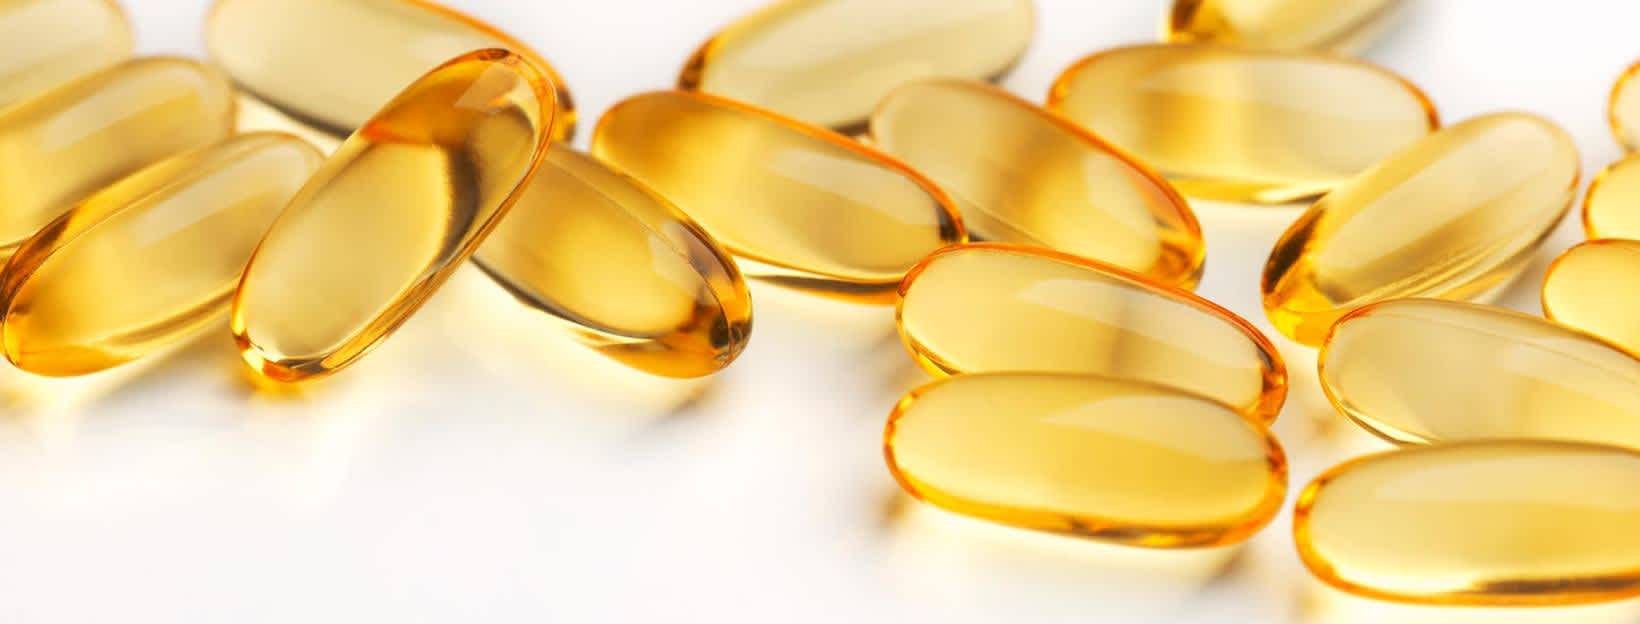 Is Fish Oil Good for Your Health? What the Studies Show